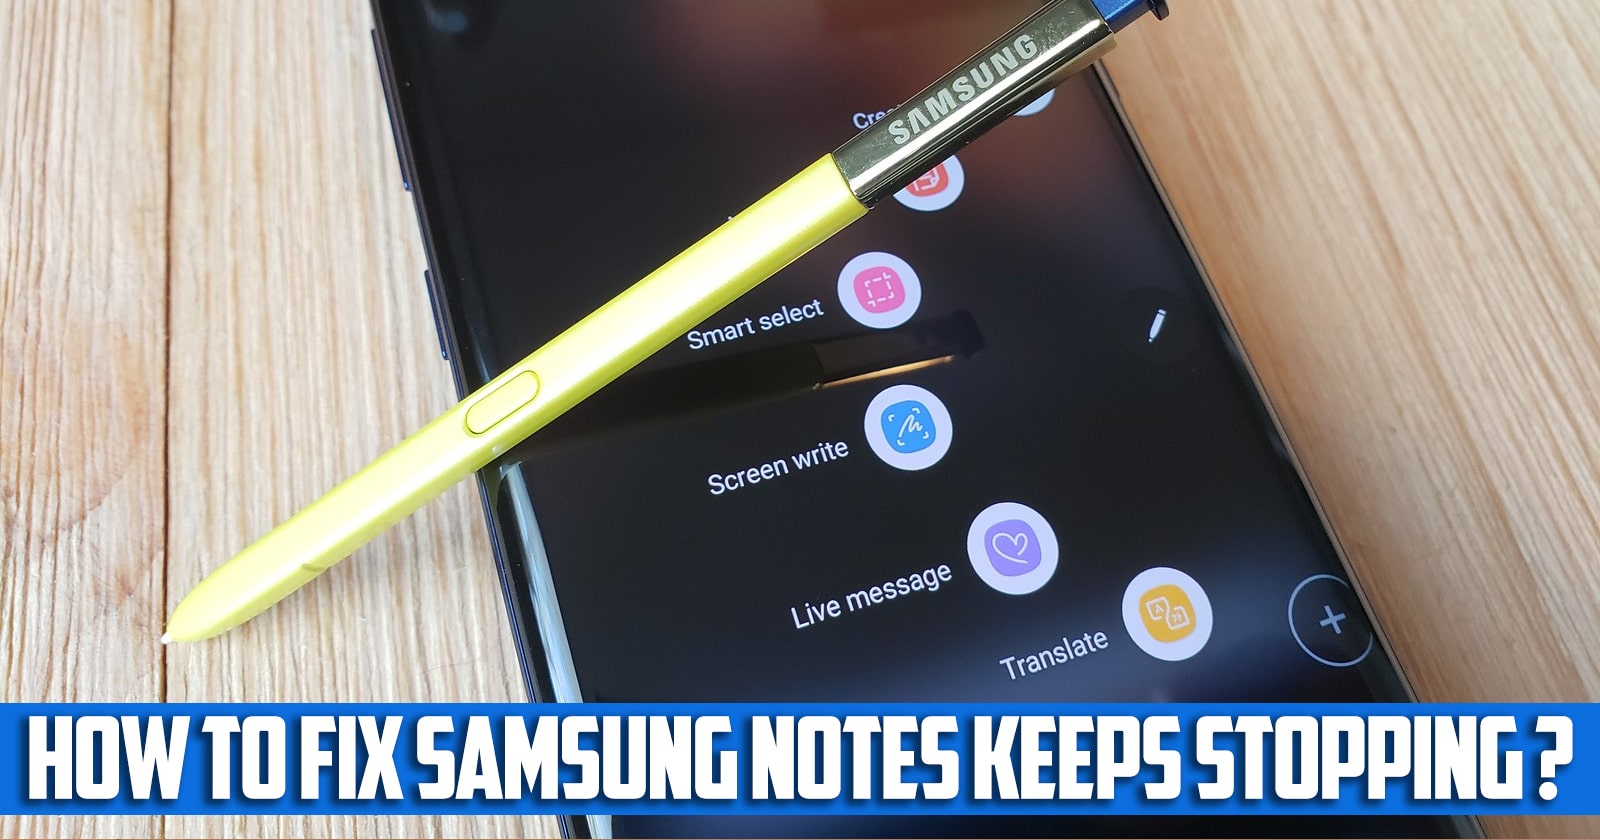 How to fix Samsung notes keeps stopping